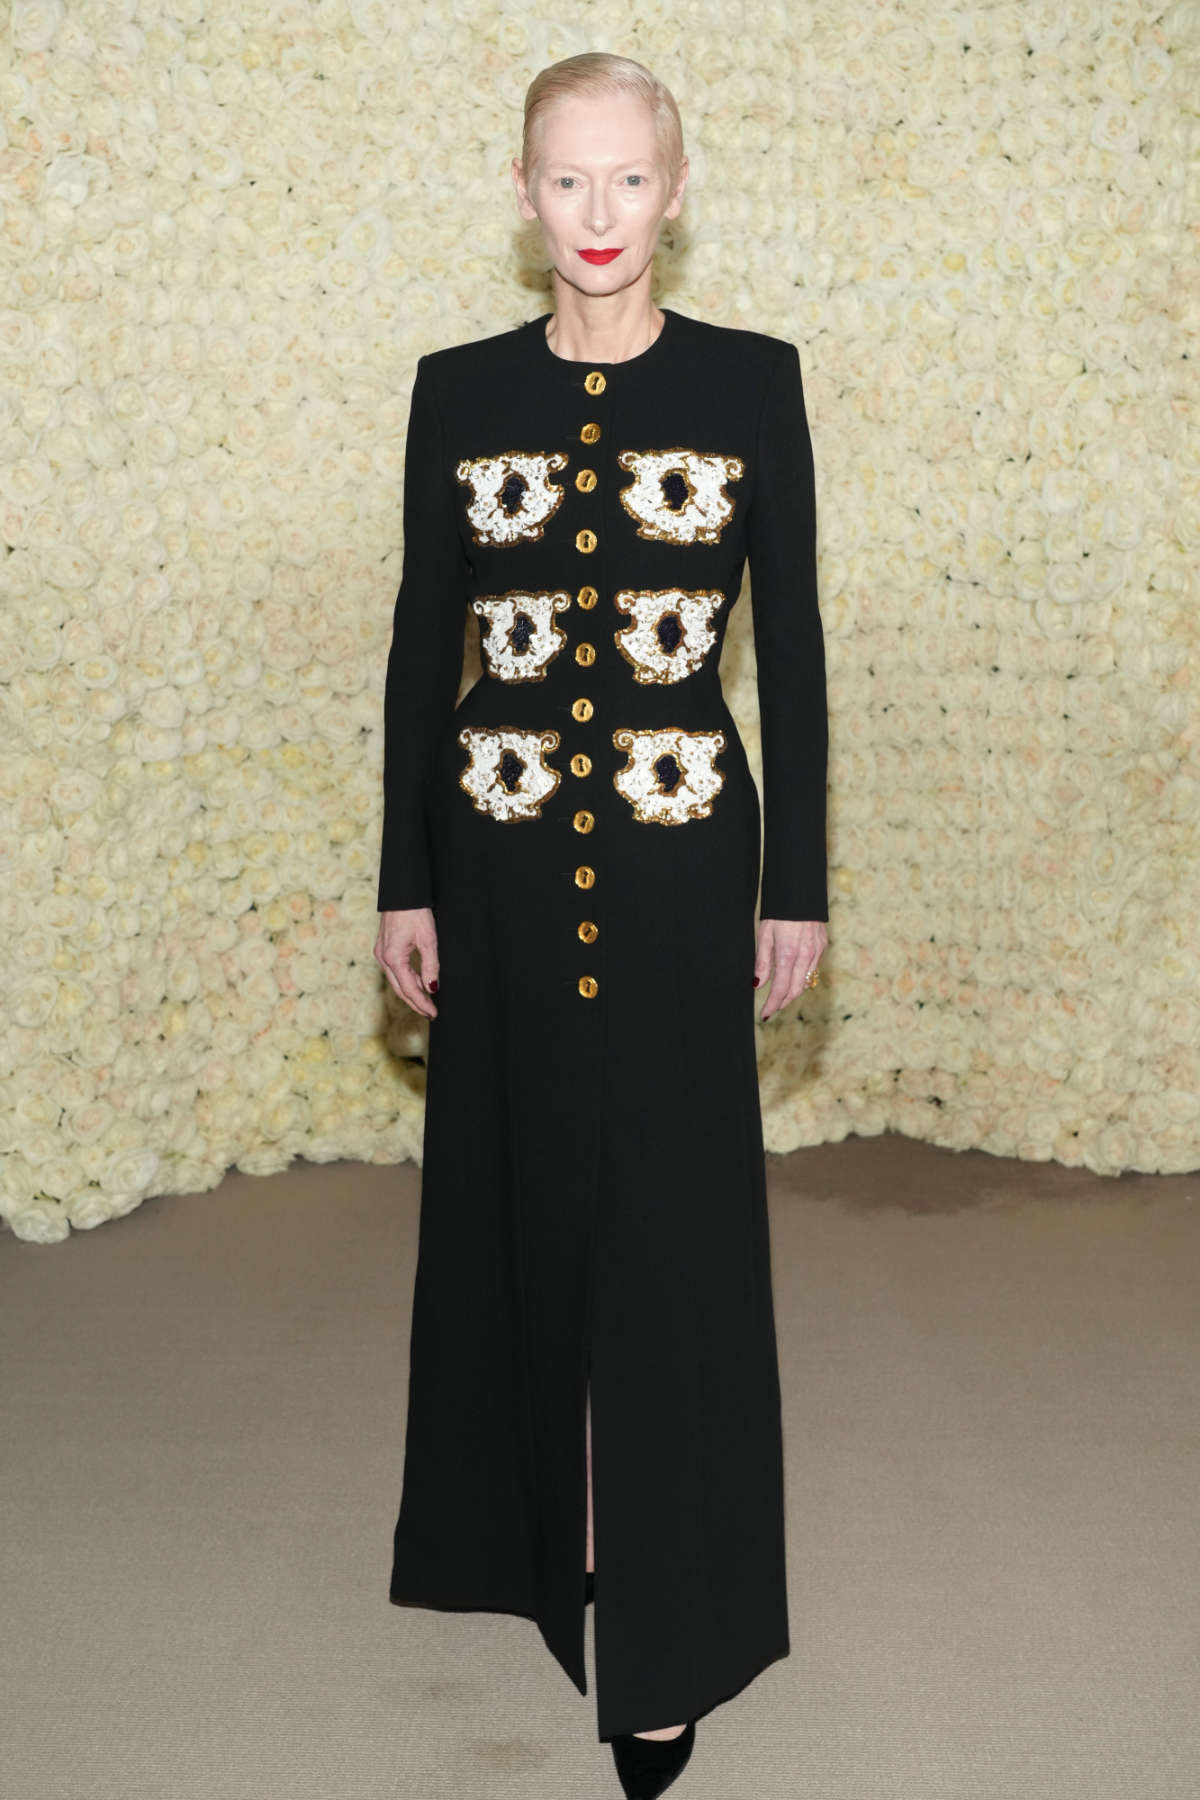 Tilda Swinton In Schiaparelli RTW To The Academy Museum Of Motion Pictures 2nd Annual Gala